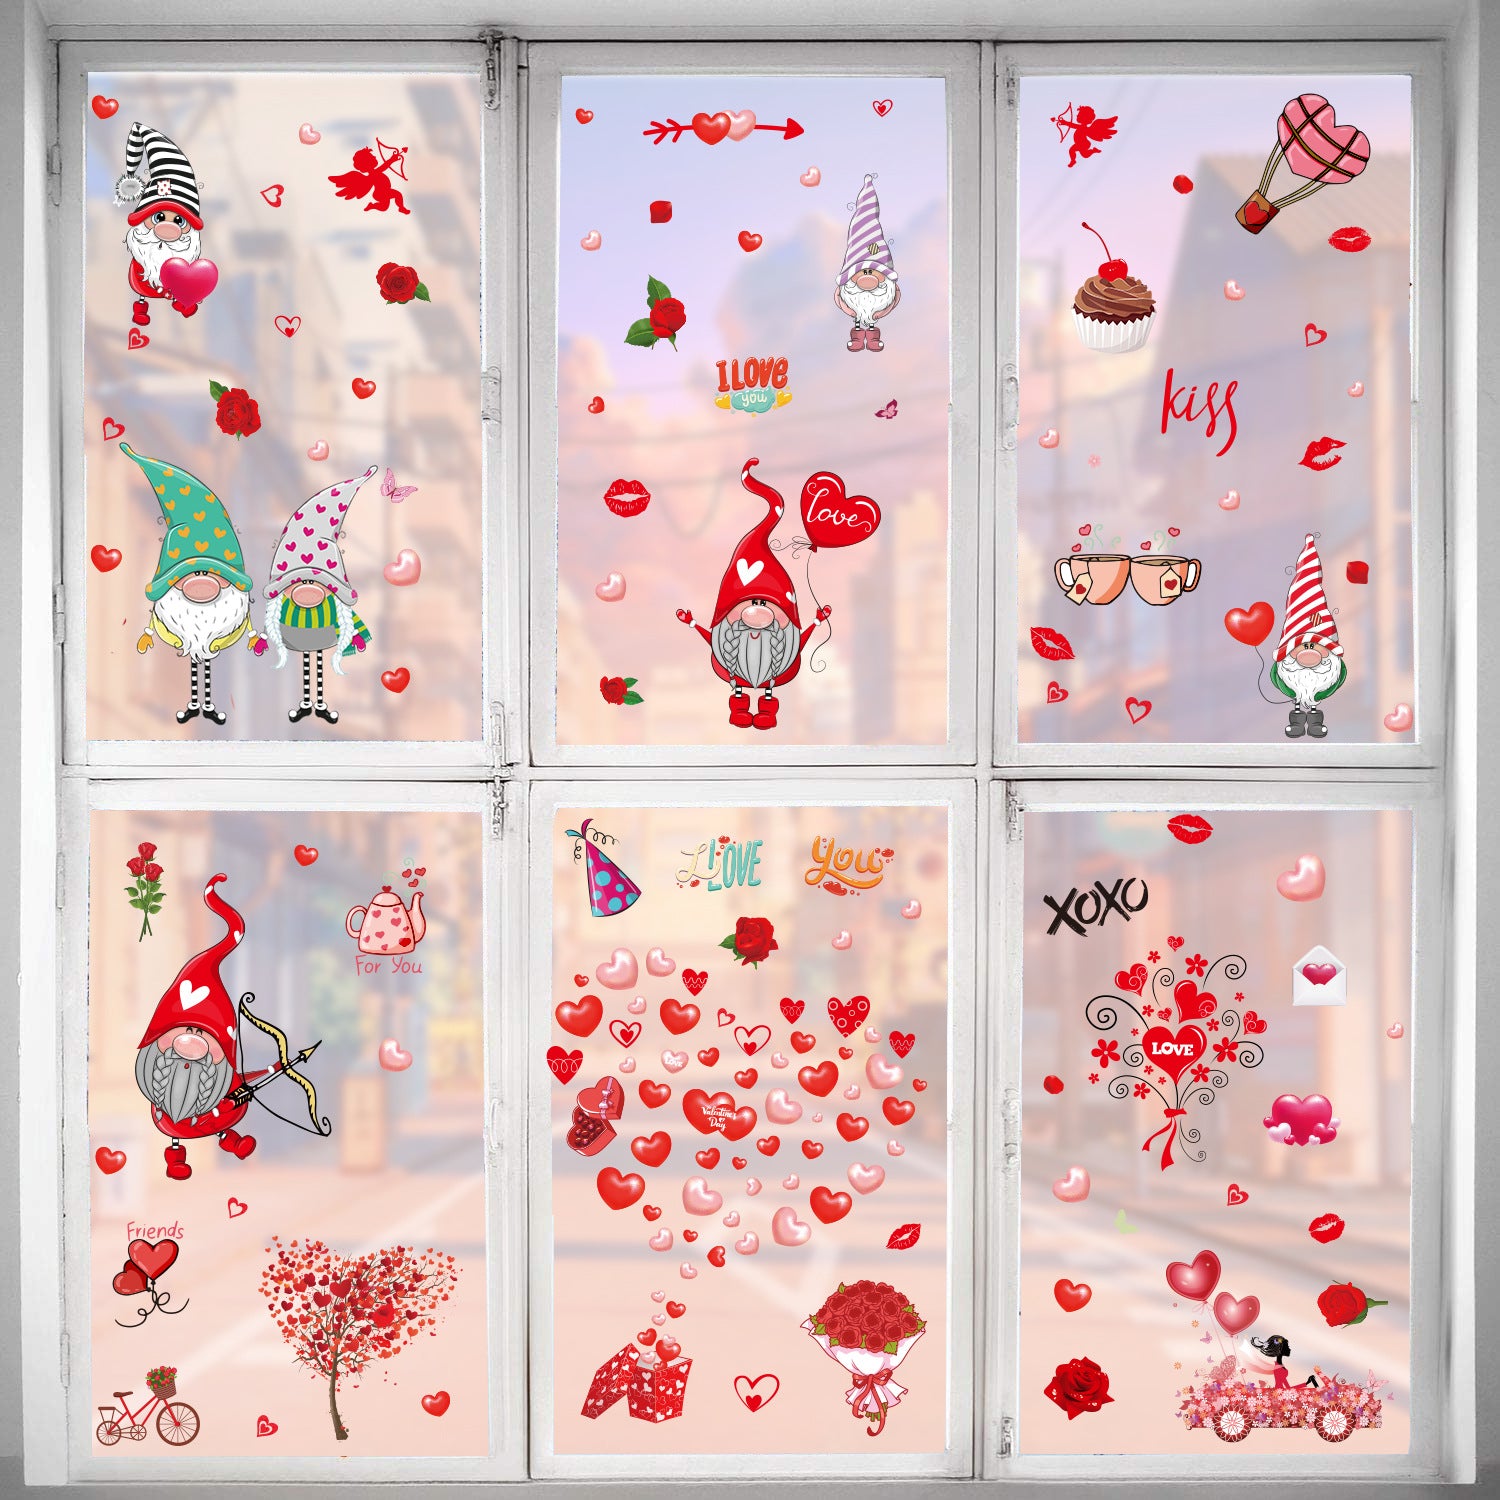 Valentine's Day Valentine's Day Electrostatic Sticker Showcase, Valentine's Day decor, Romantic home accents, Heart-themed decorations, Cupid-inspired ornaments, Love-themed party supplies, Red and pink decor, Valentine's Day table settings, Romantic ambiance accessories, Heart-shaped embellishments, Valentine's Day home embellishments